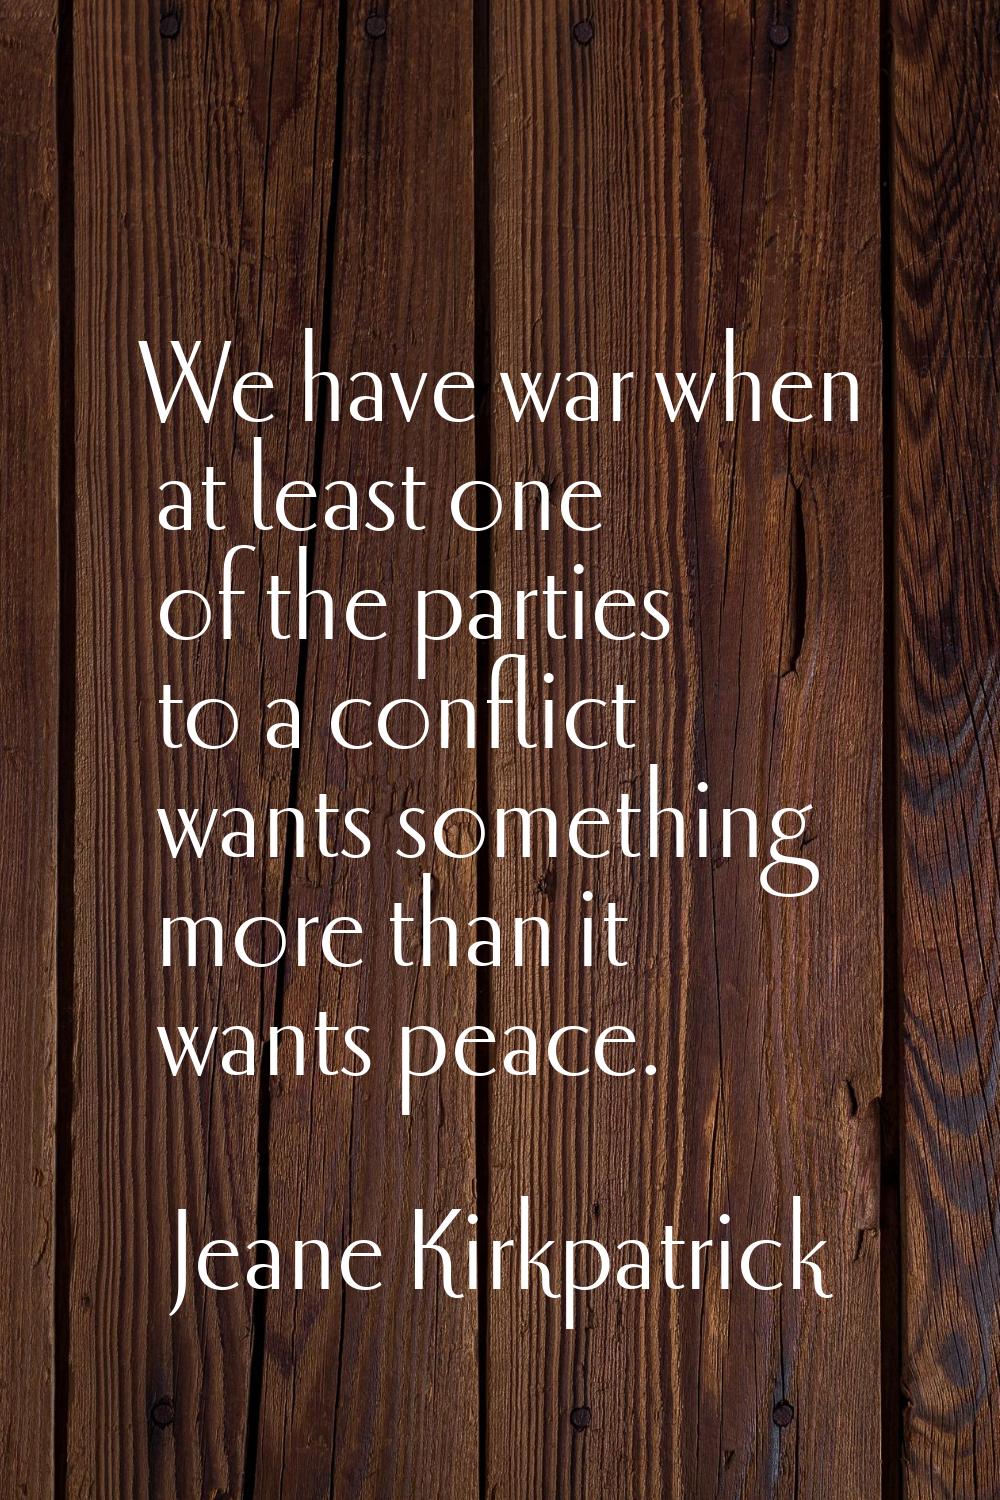 We have war when at least one of the parties to a conflict wants something more than it wants peace